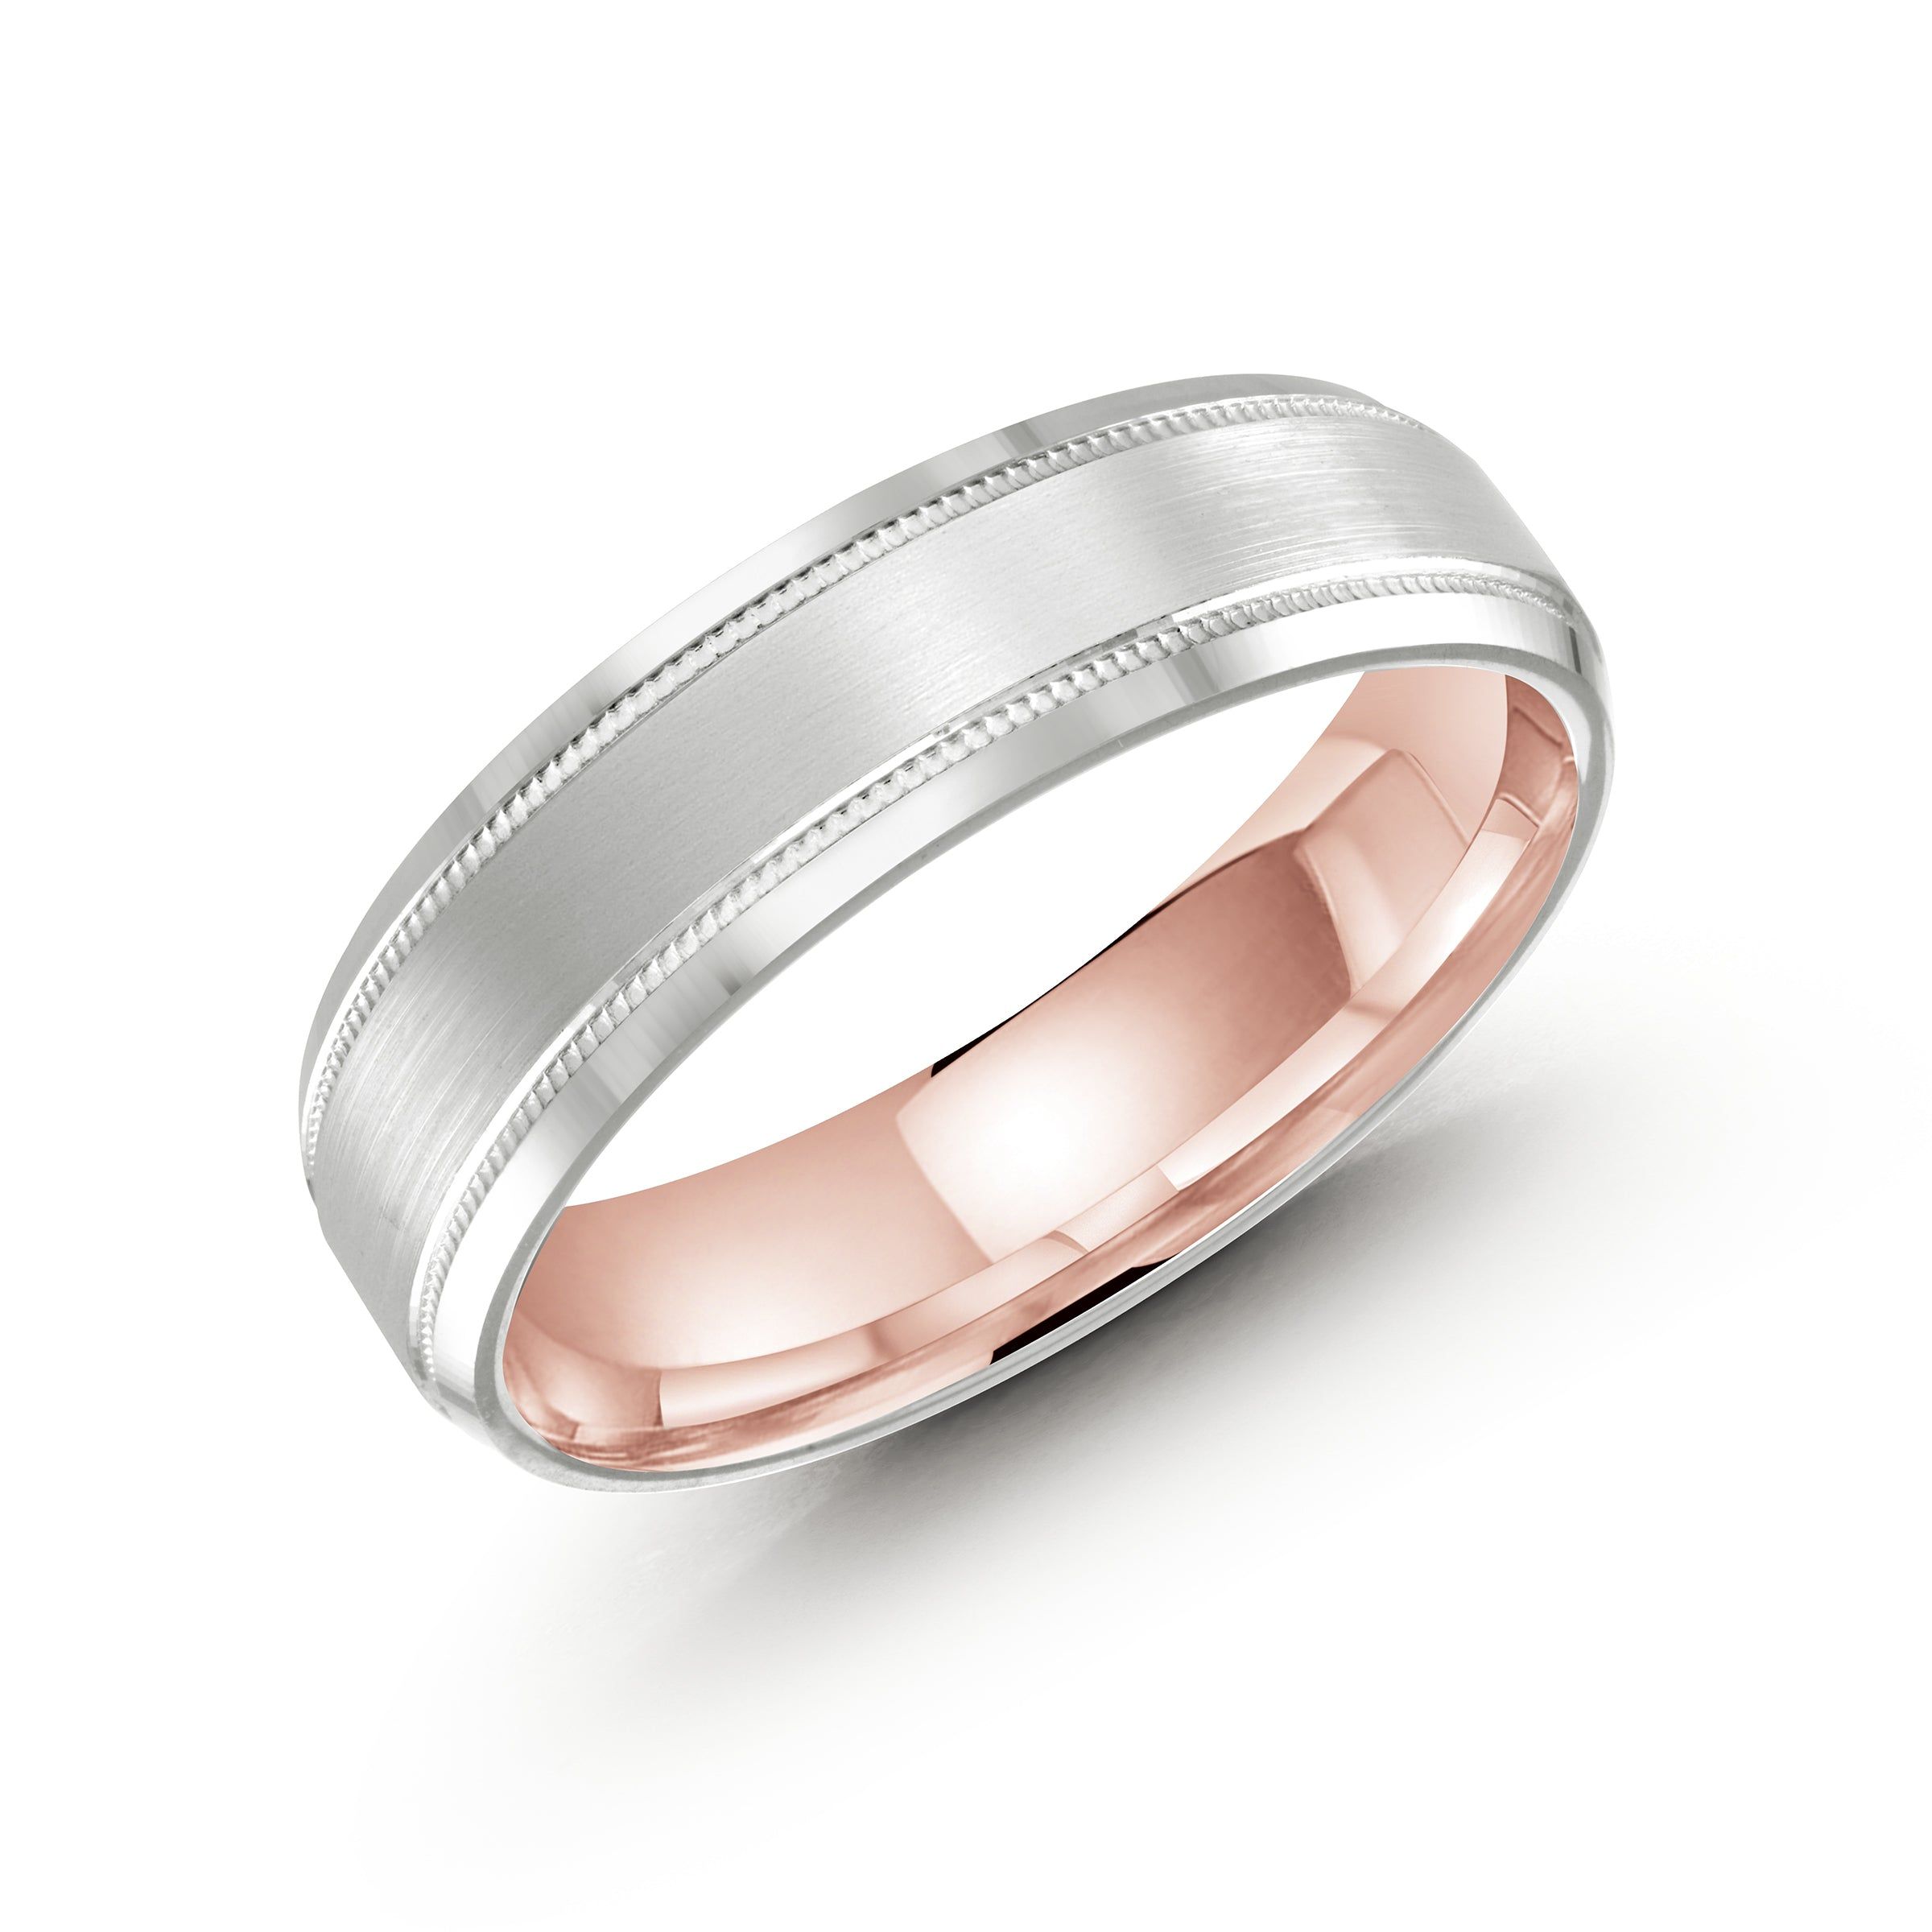 Men's 6mm Two-tone Satin-finish Comfort-fit Wedding Ring With Milgrain